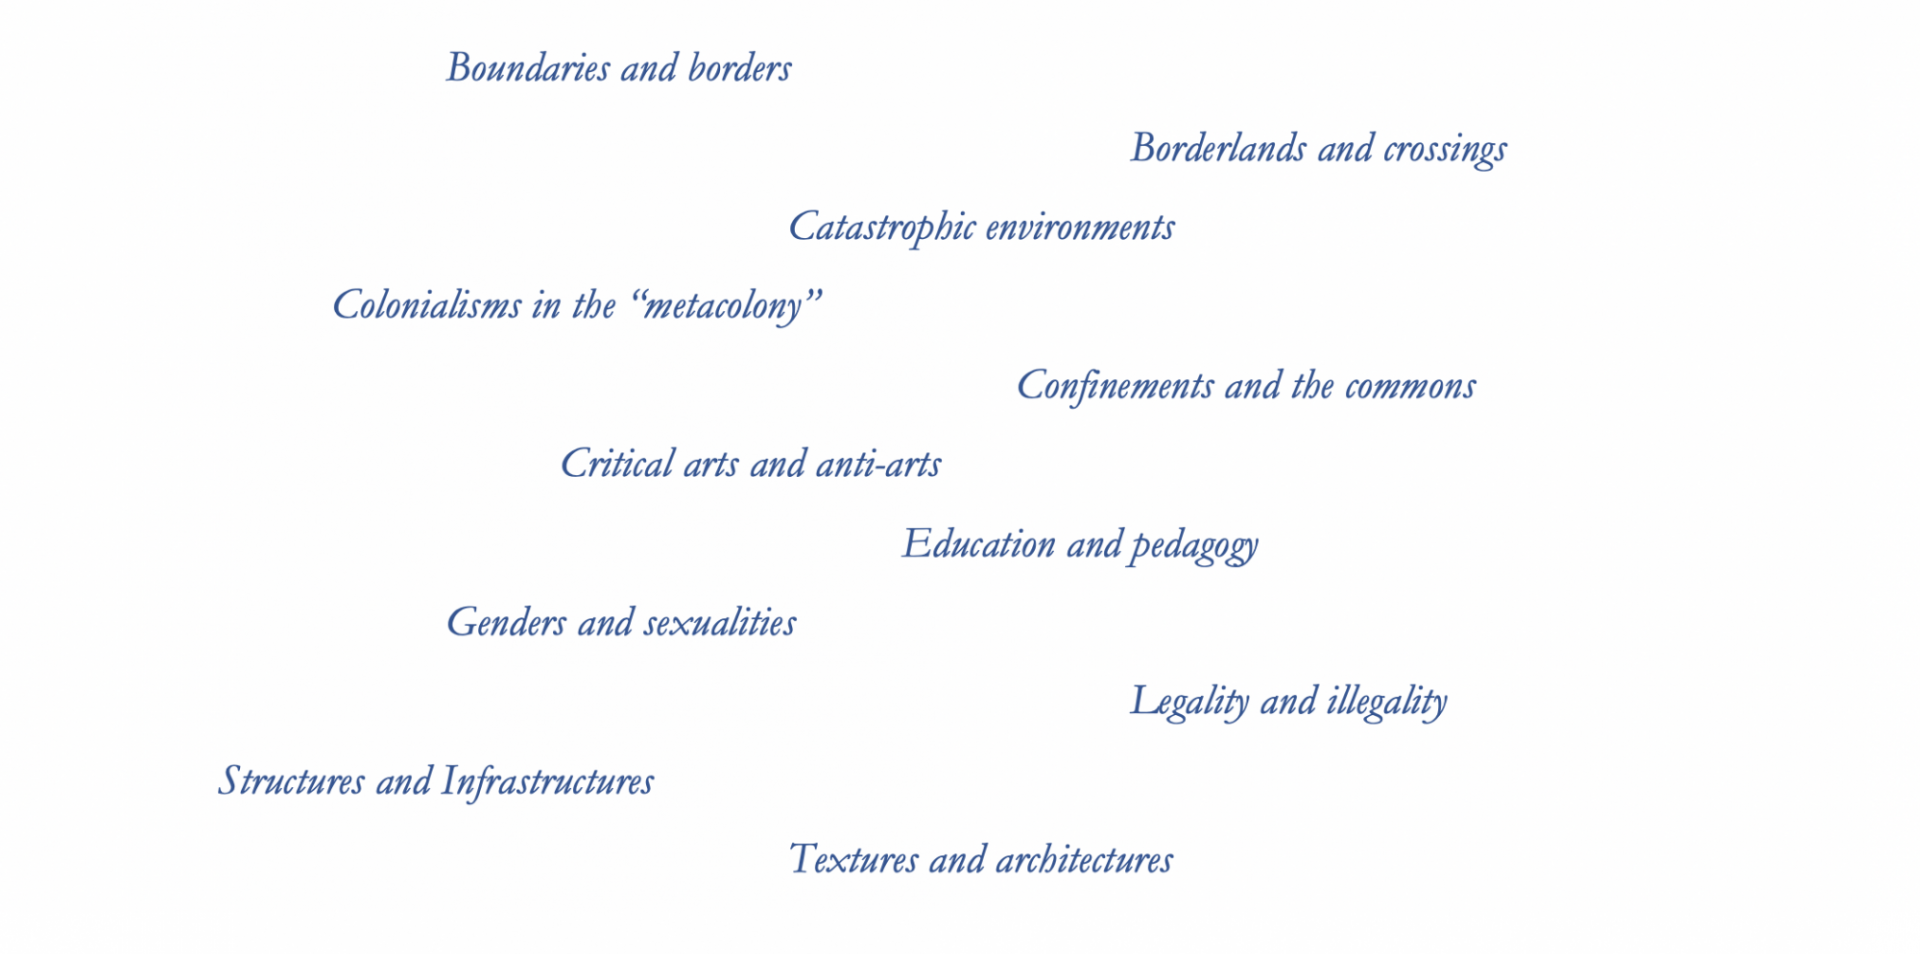 Boundaries and borders 
Borderlands and crossings 
Catastrophic environments
Colonialisms in the “metacolony”
Confinements and the commons
Critical arts and anti-arts
Education and pedagogy
Genders and sexualities 
Legality and illegality
Structures and Infrastructures
Textures and architectures  
